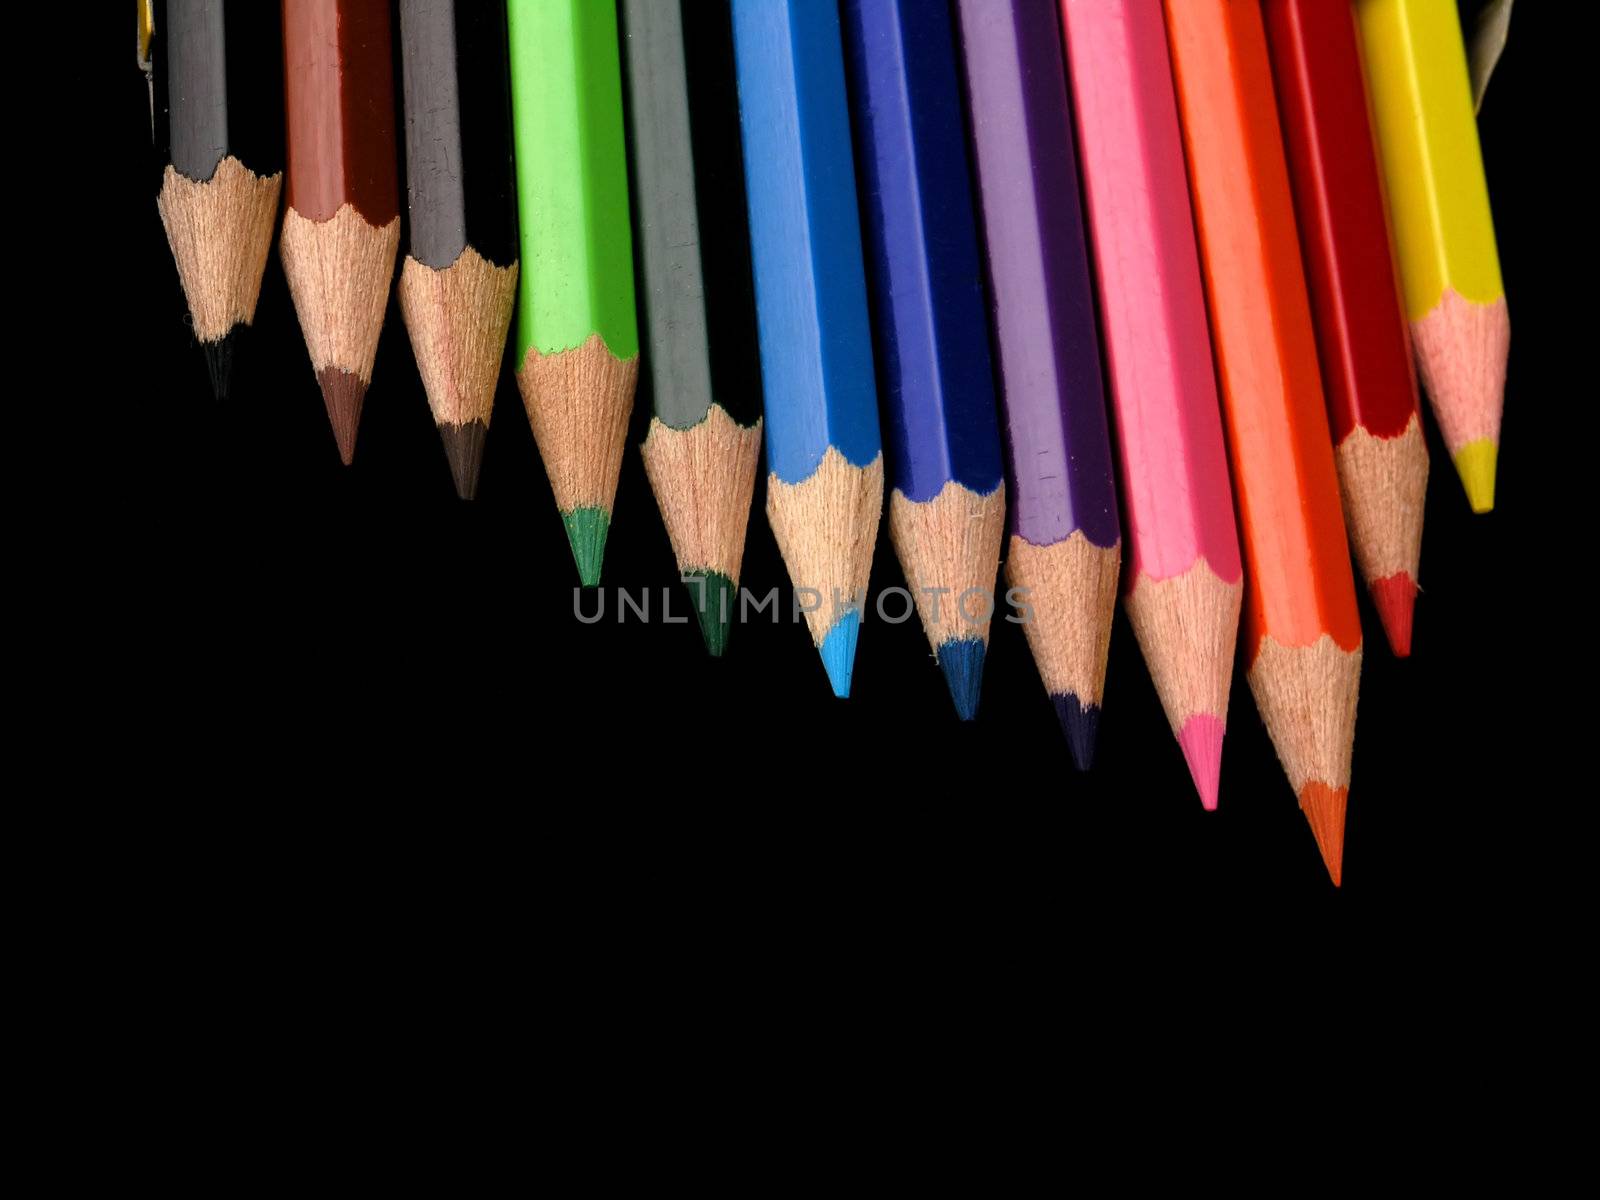 Colored Pencils in a Row